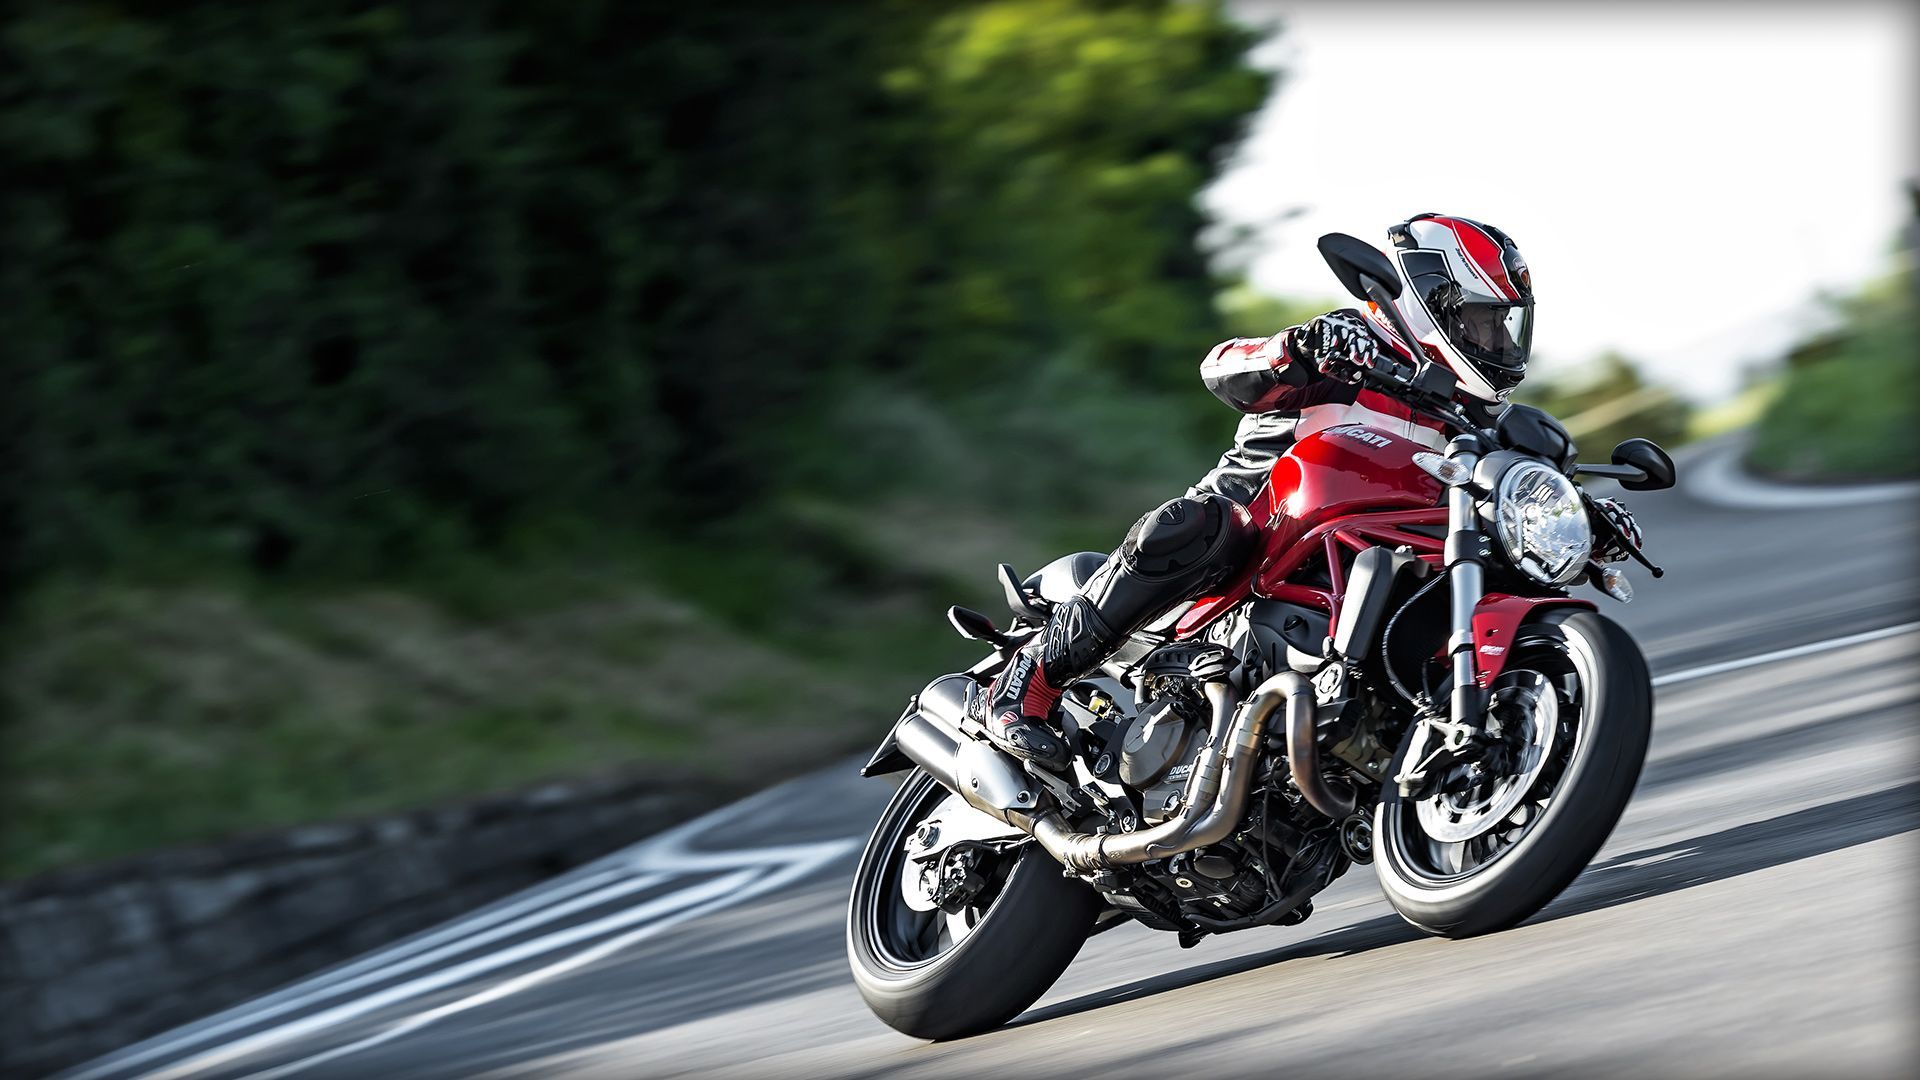 , Ducati, Ducati Monster, Ducati Monster 821, Monster, Naked Motorcycle.